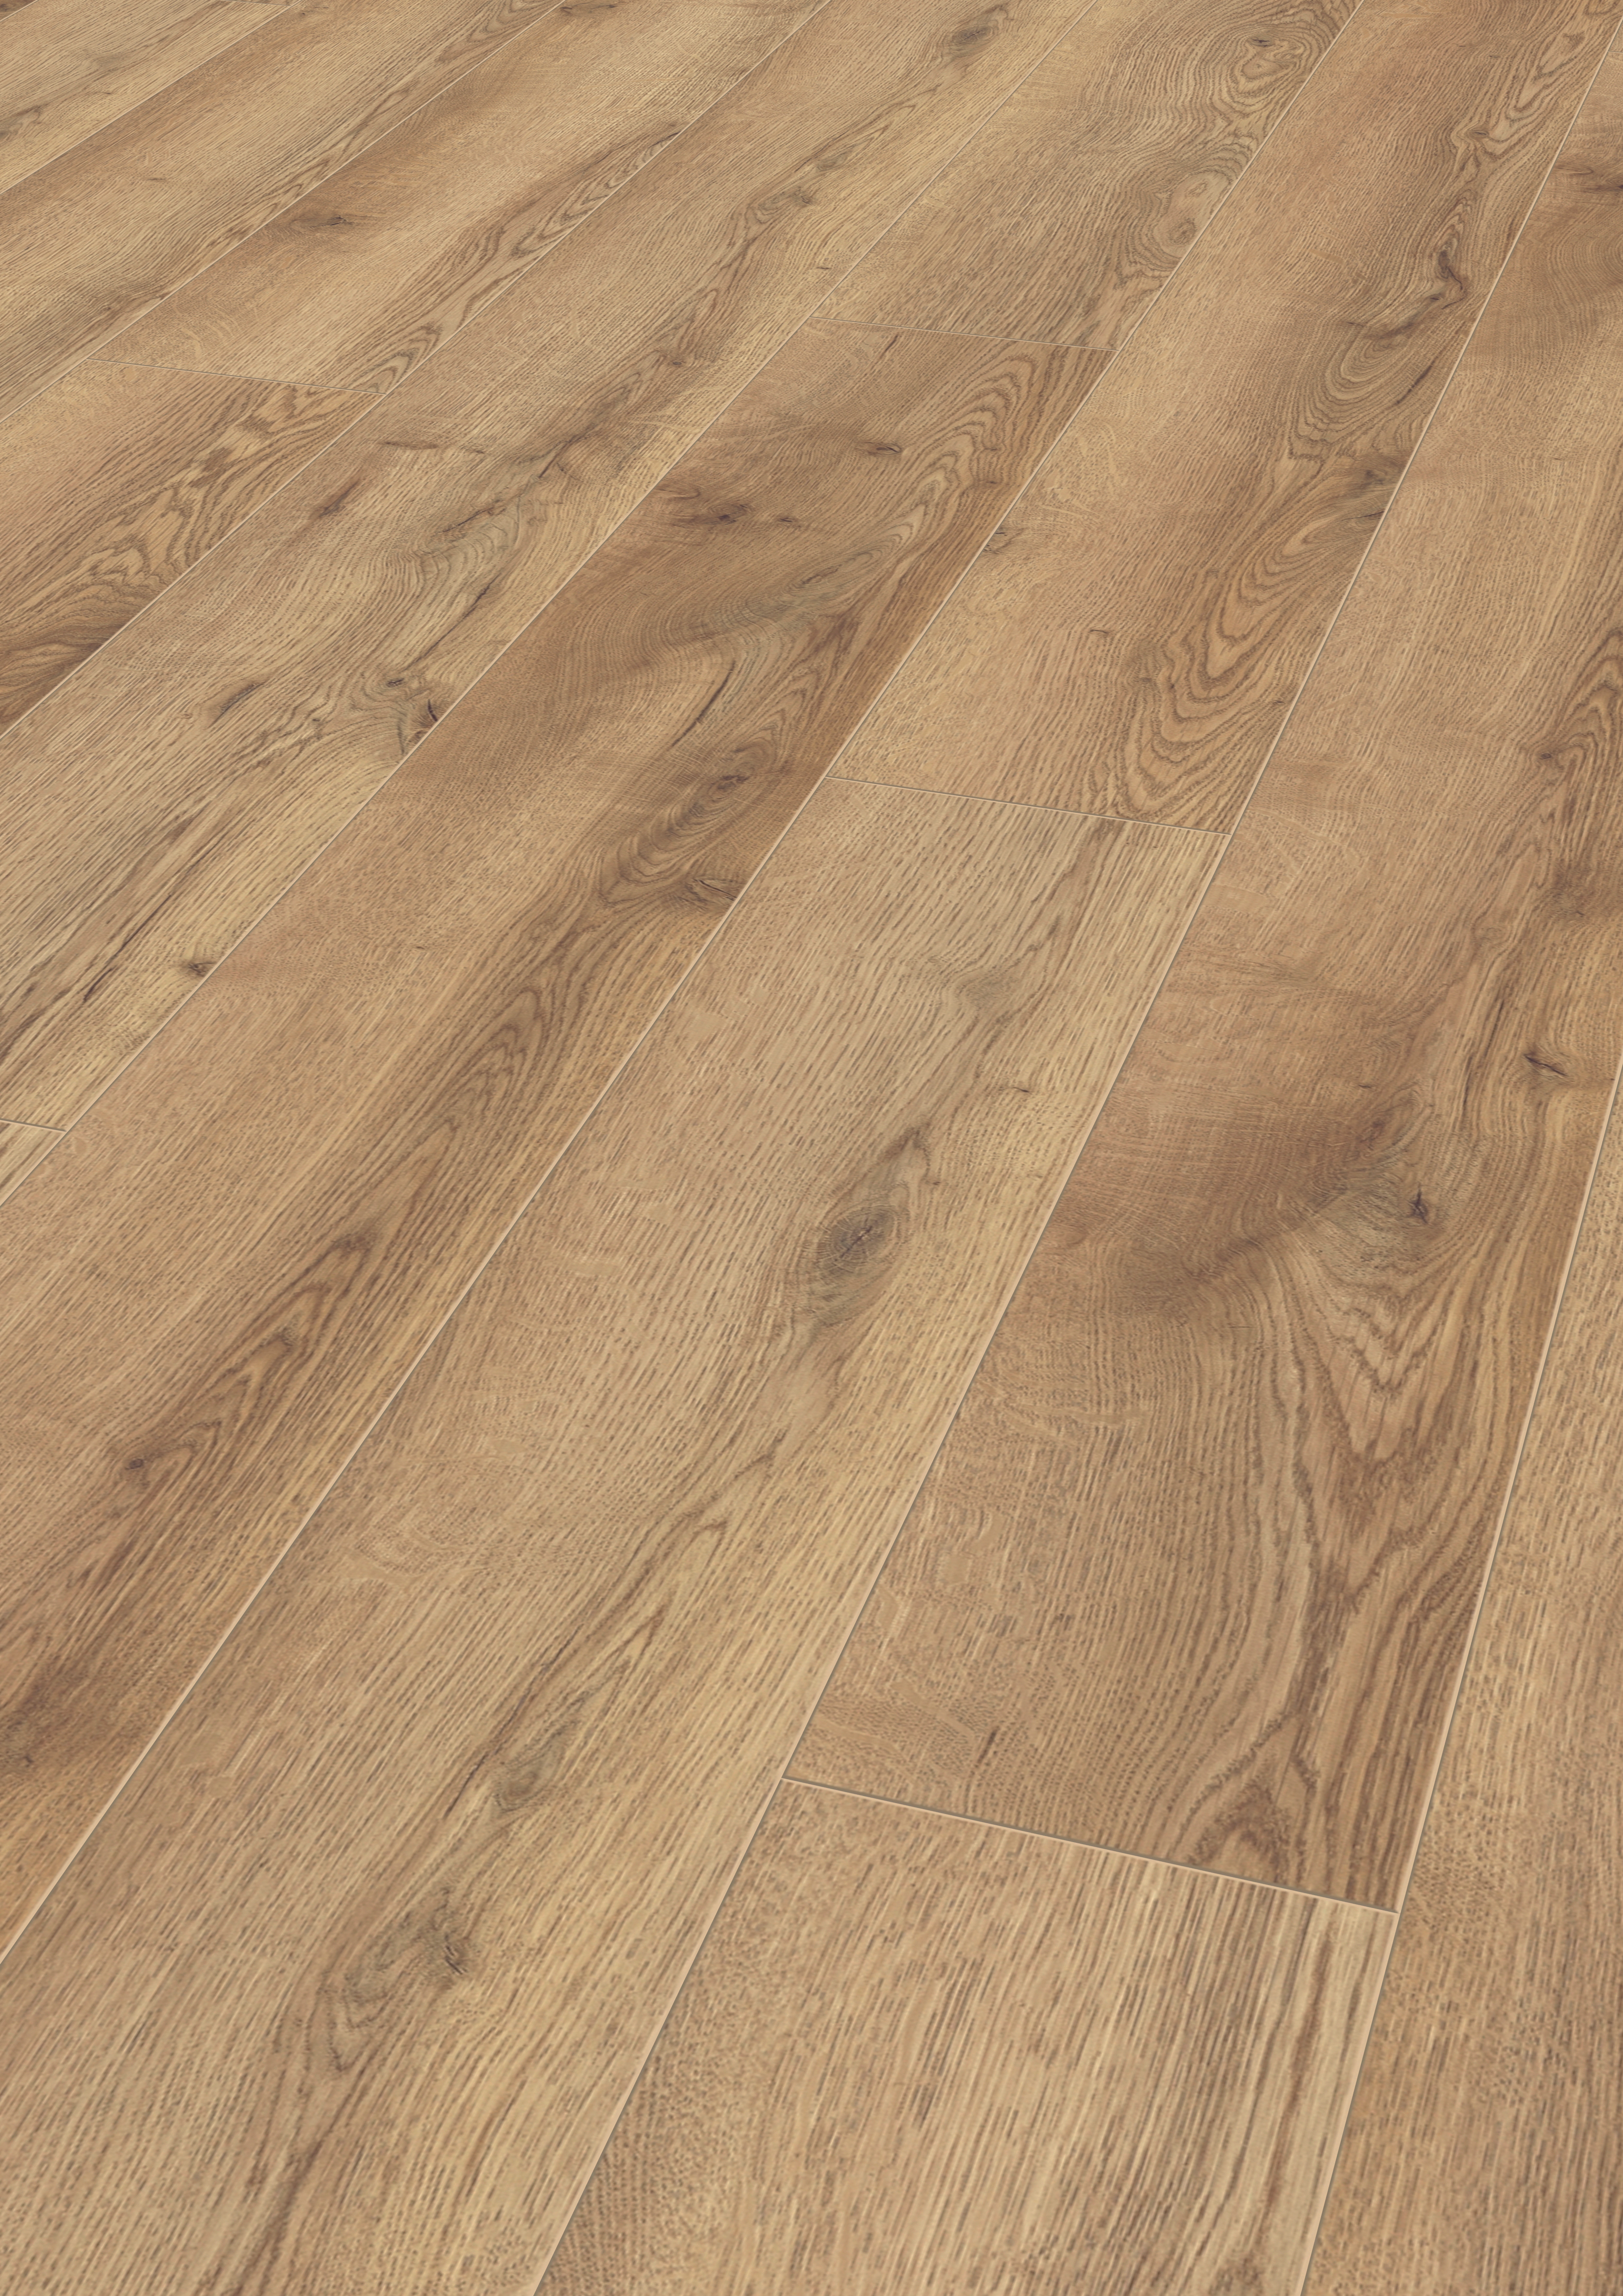 13 Stylish Hardwood Floors Magazine Digital issue 2024 free download hardwood floors magazine digital issue of mammut laminate flooring in country house plank style kronotex inside download picture amp